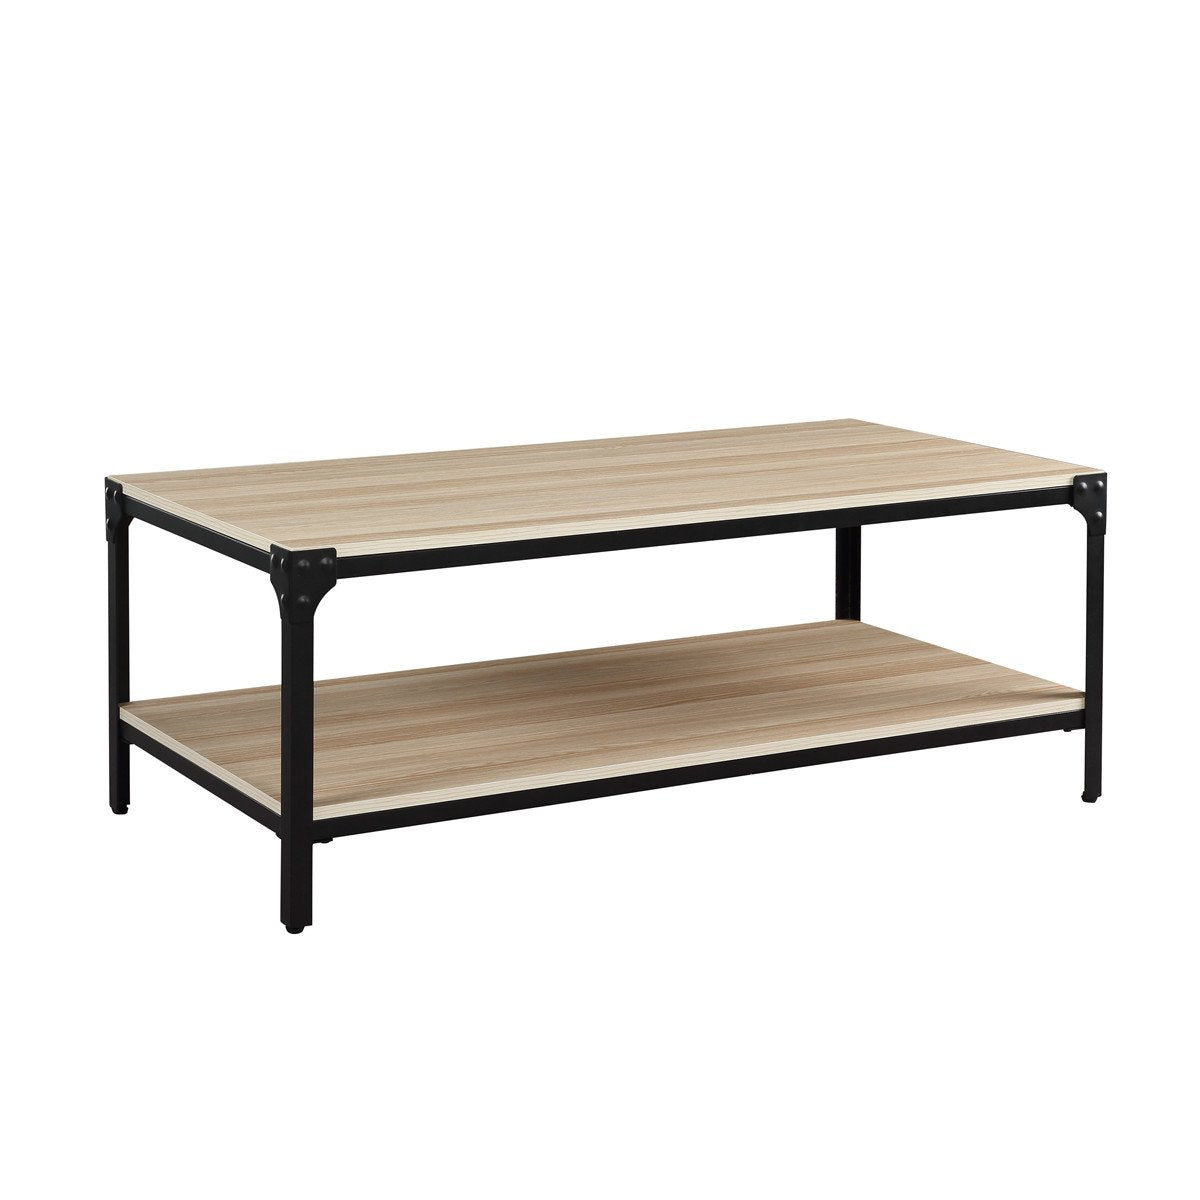 Industrial Coffee Table for Living Room | Wood Look Accent Furniture